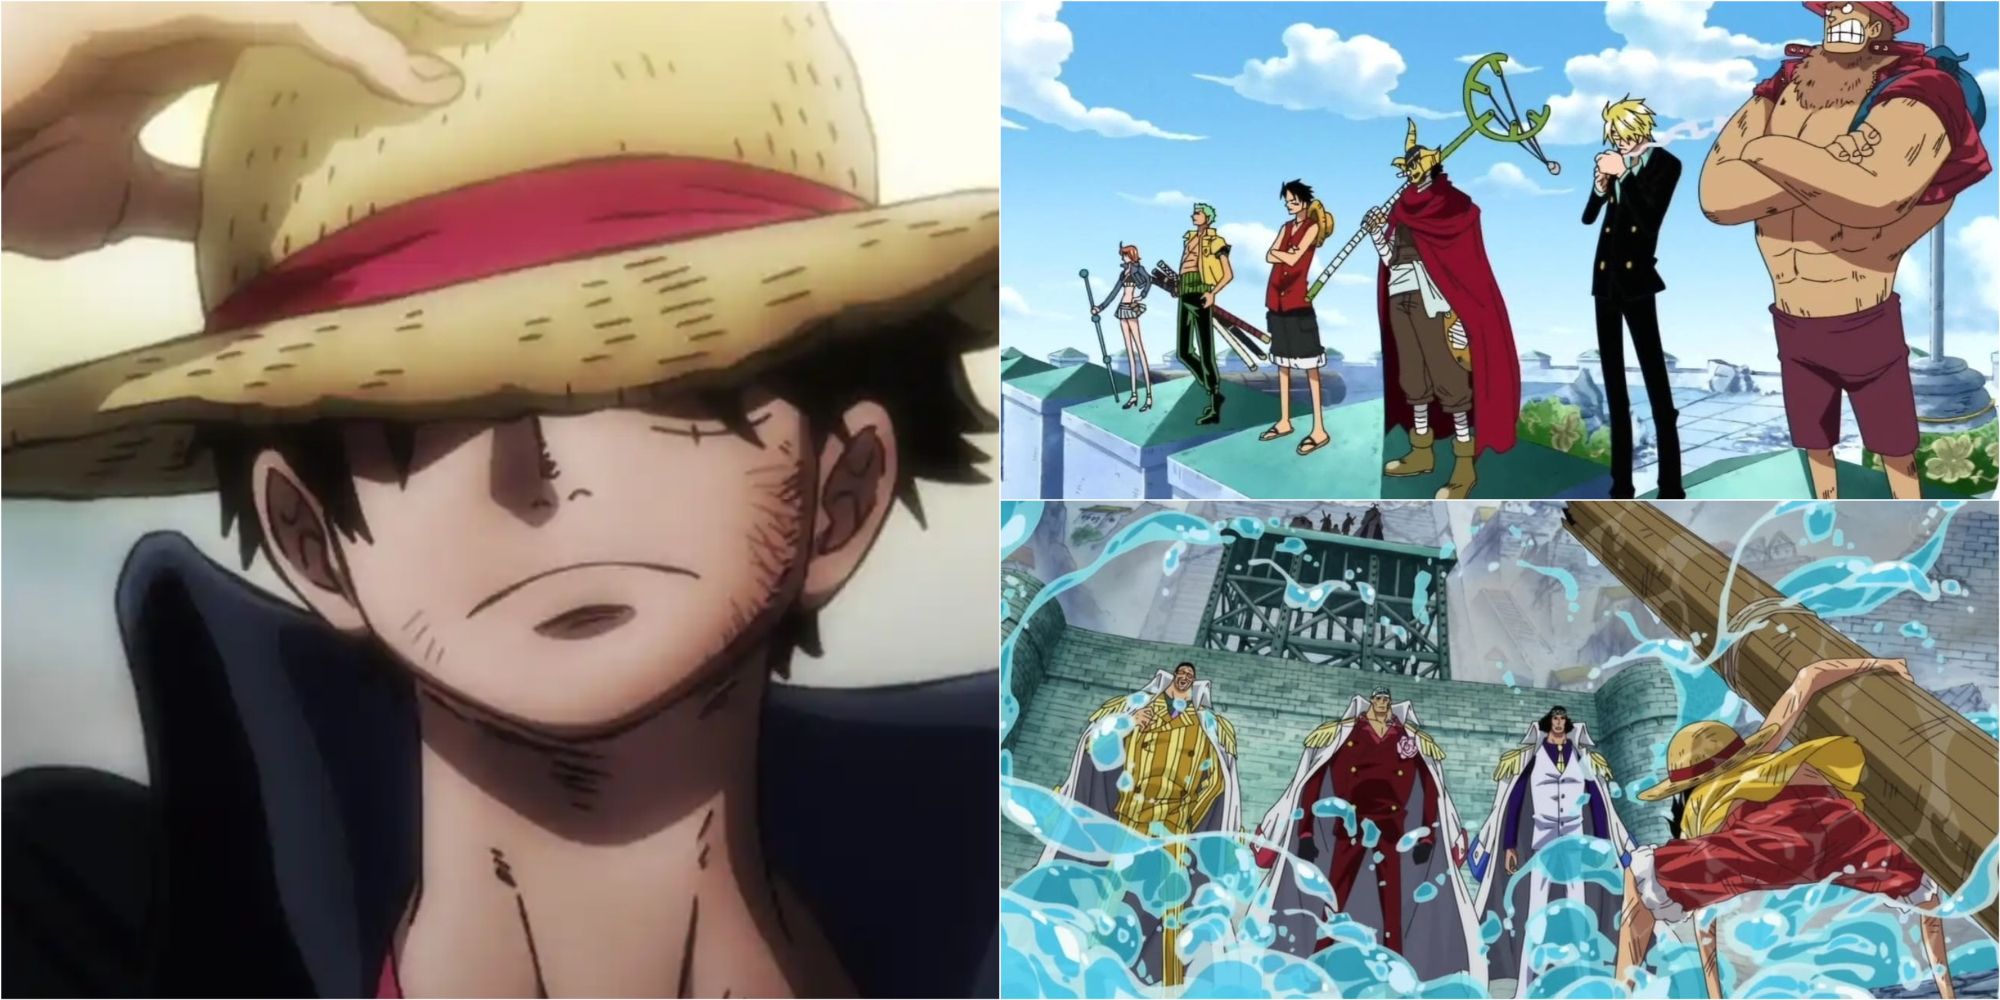 I Don't Need A Title!  Monkey d luffy, Luffy, Anime